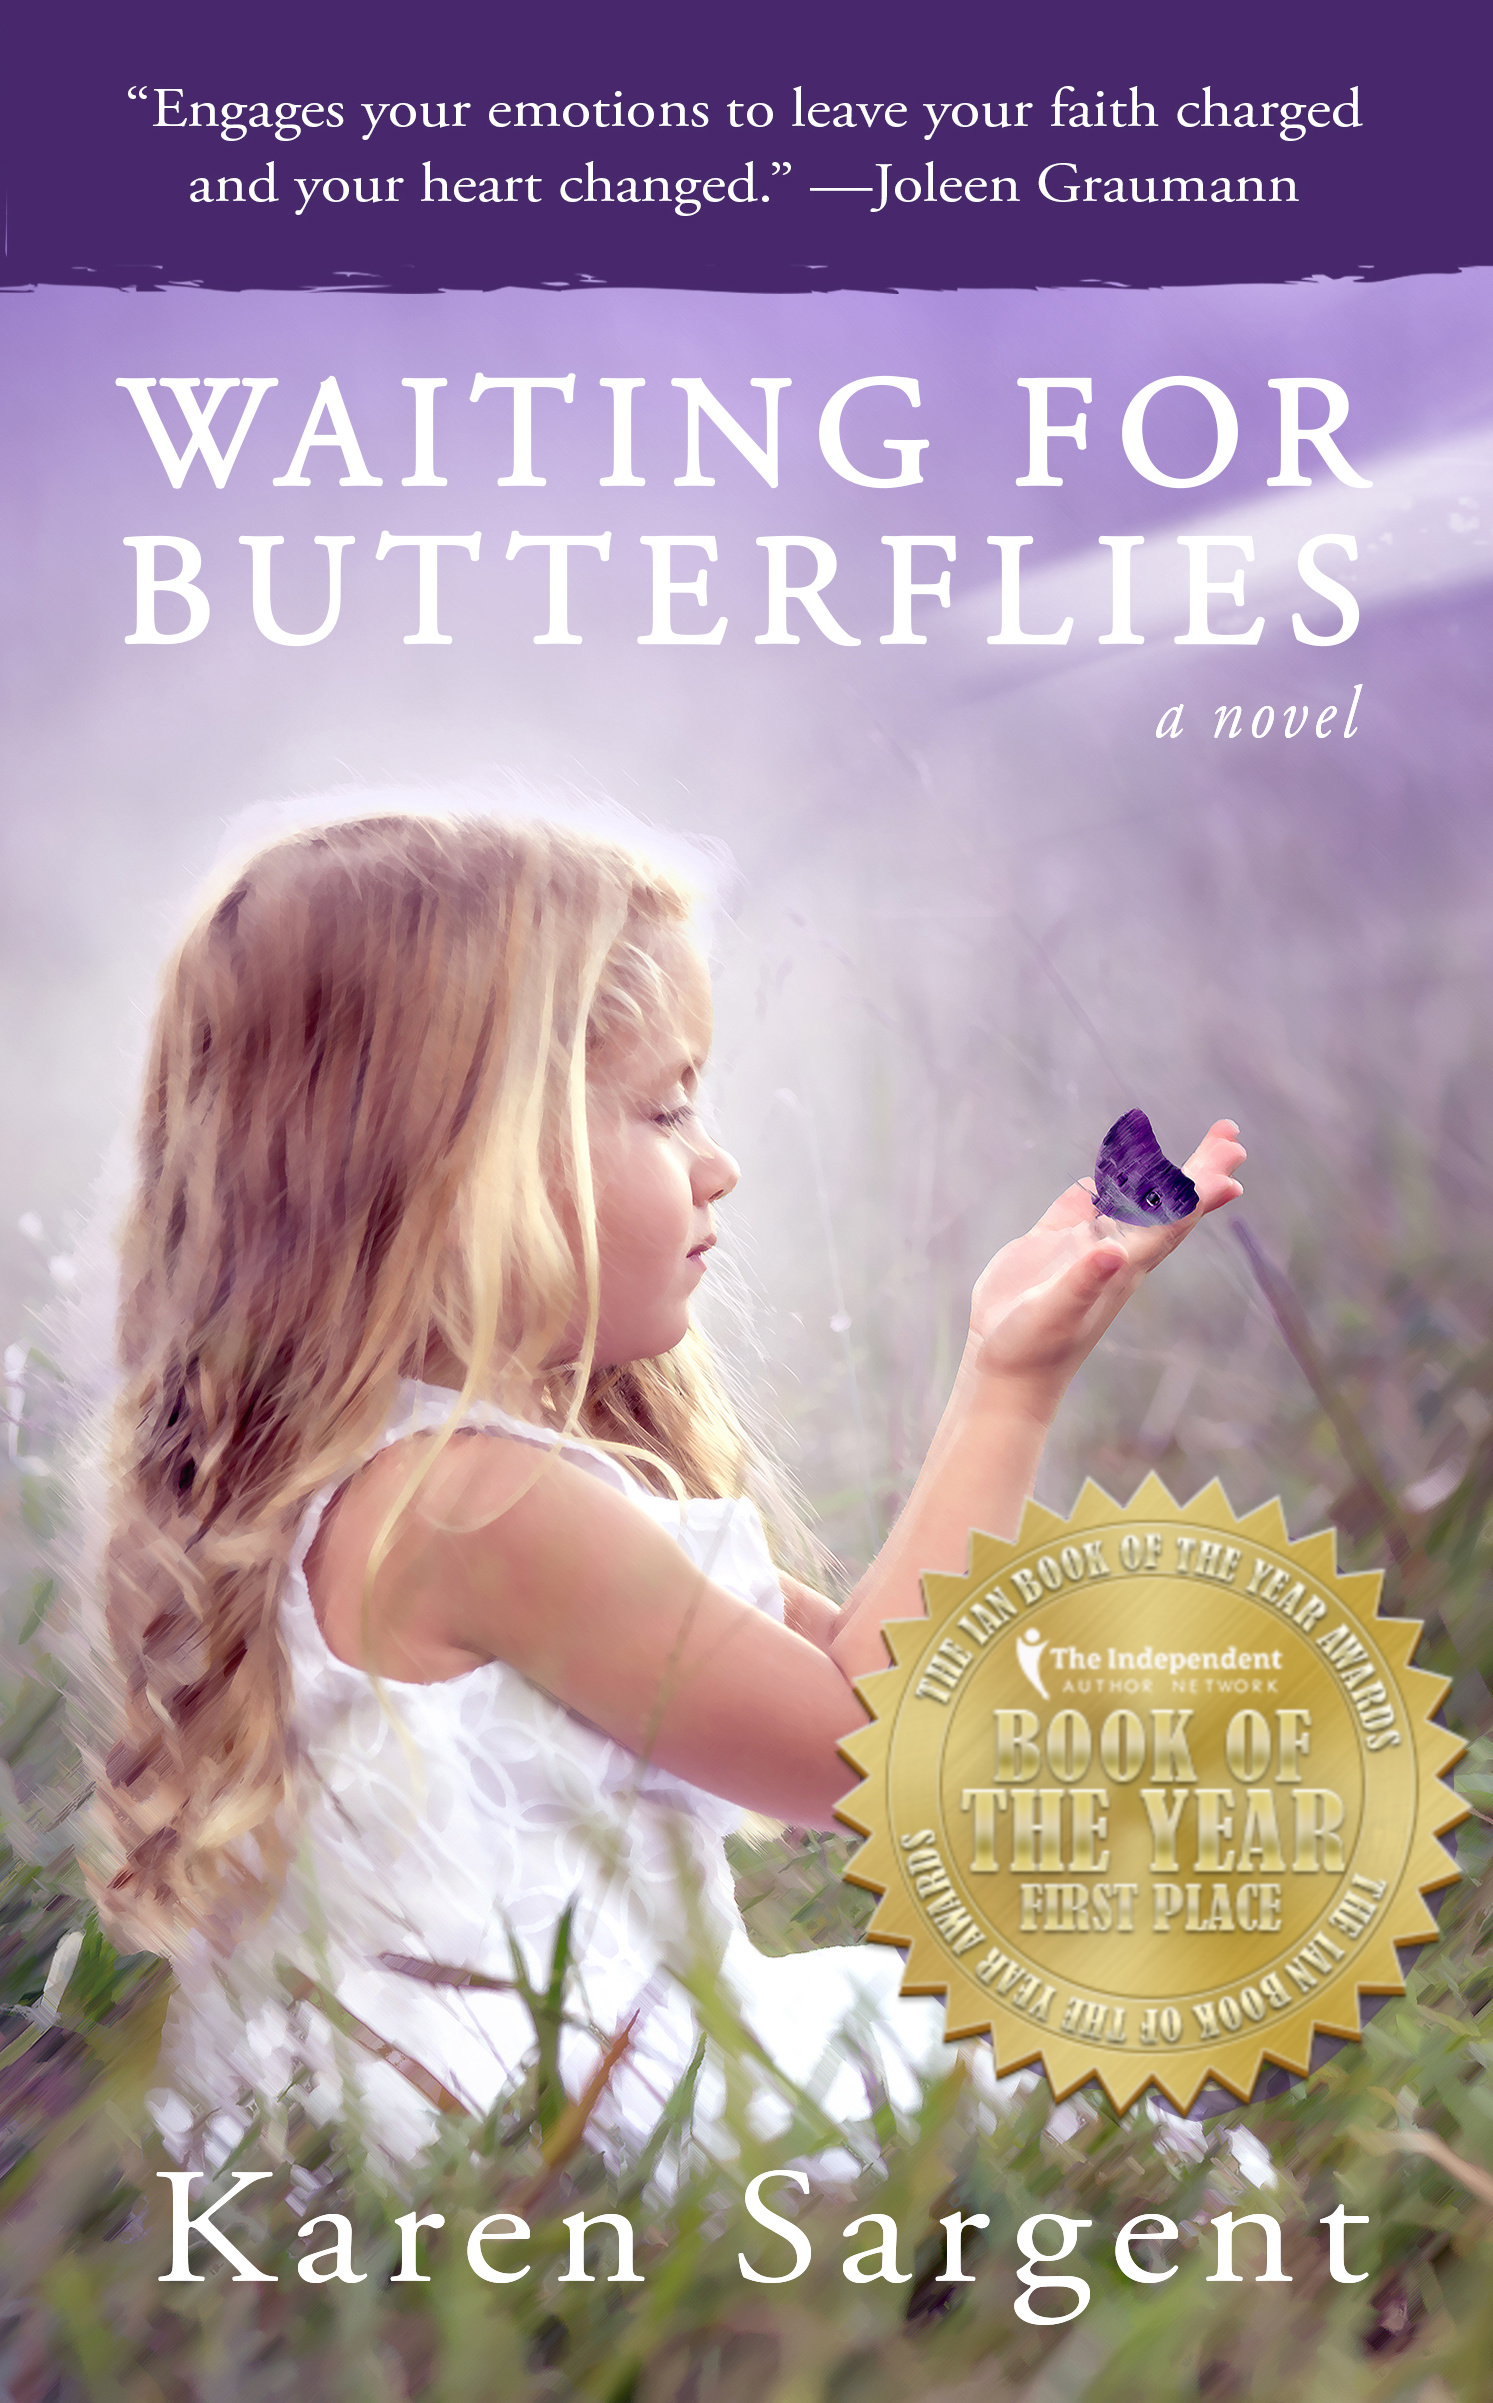 Book cover image for Karen Sargent's Waiting for Butterflies novel